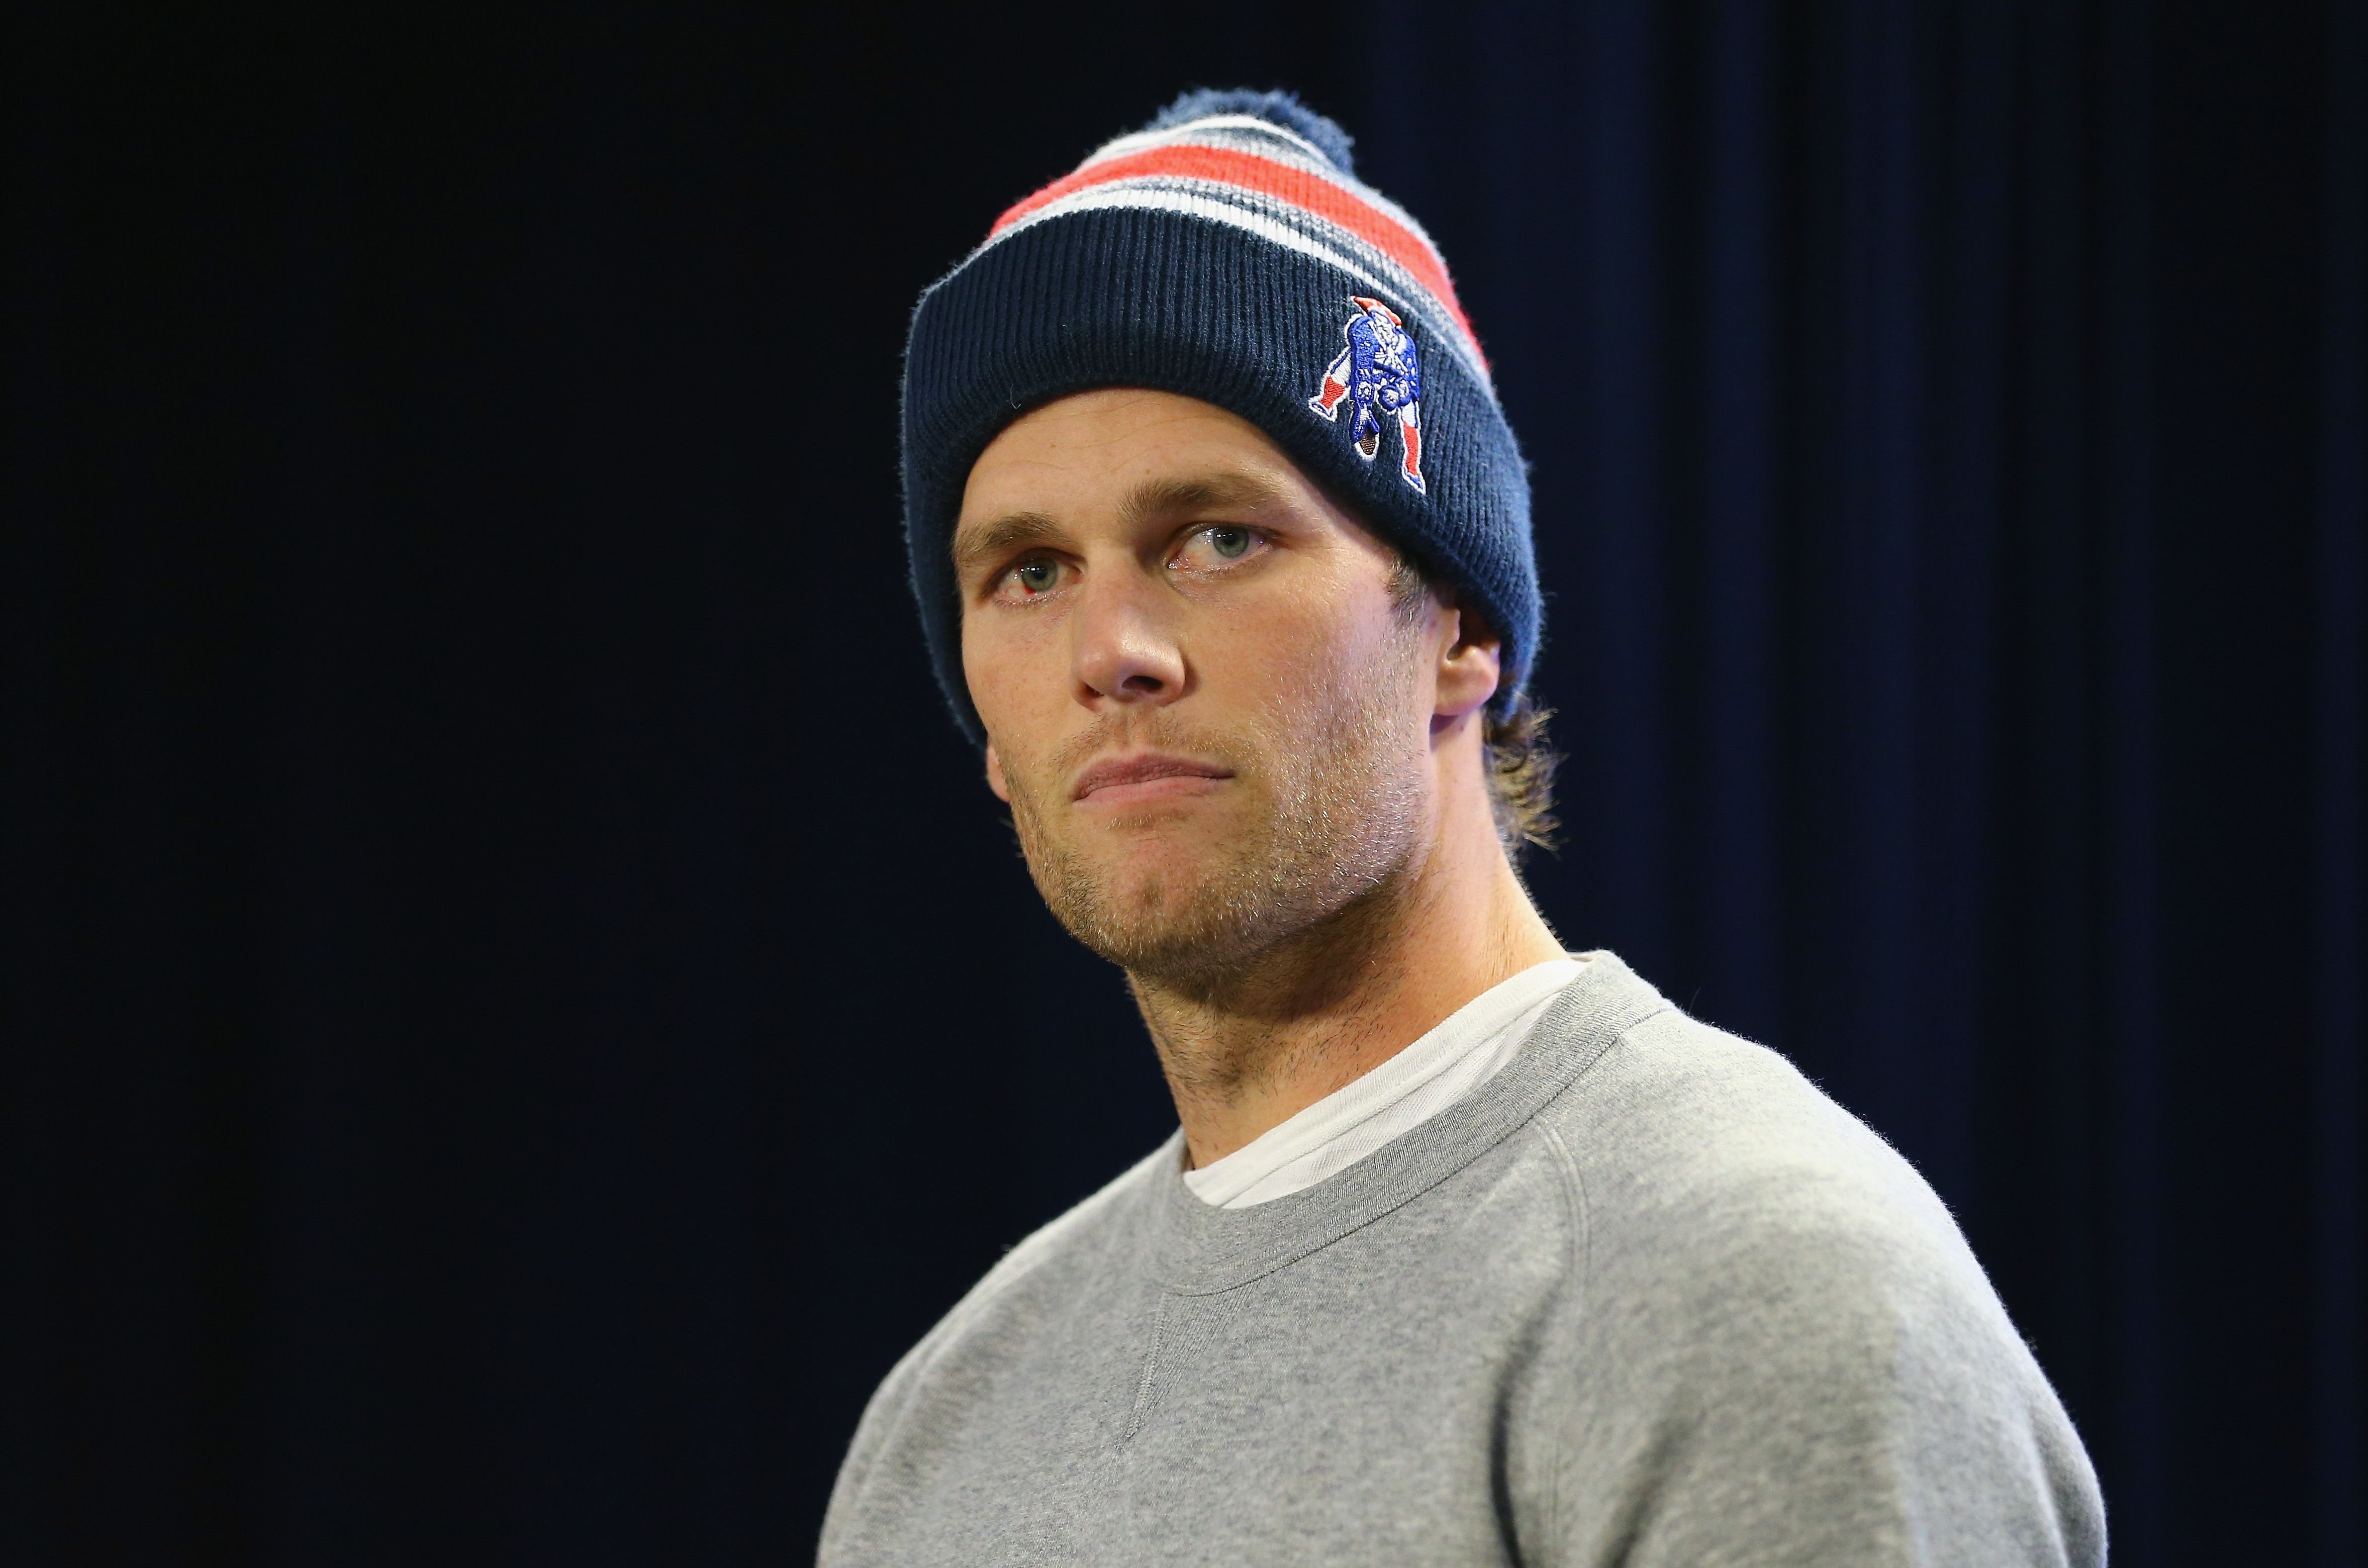 Tom Brady during a press conference to address the under inflation of footballs used in the AFC championship game on January 22, 2015, in Foxboro, Massachusetts | Photo: Maddie Meyer/Getty Images